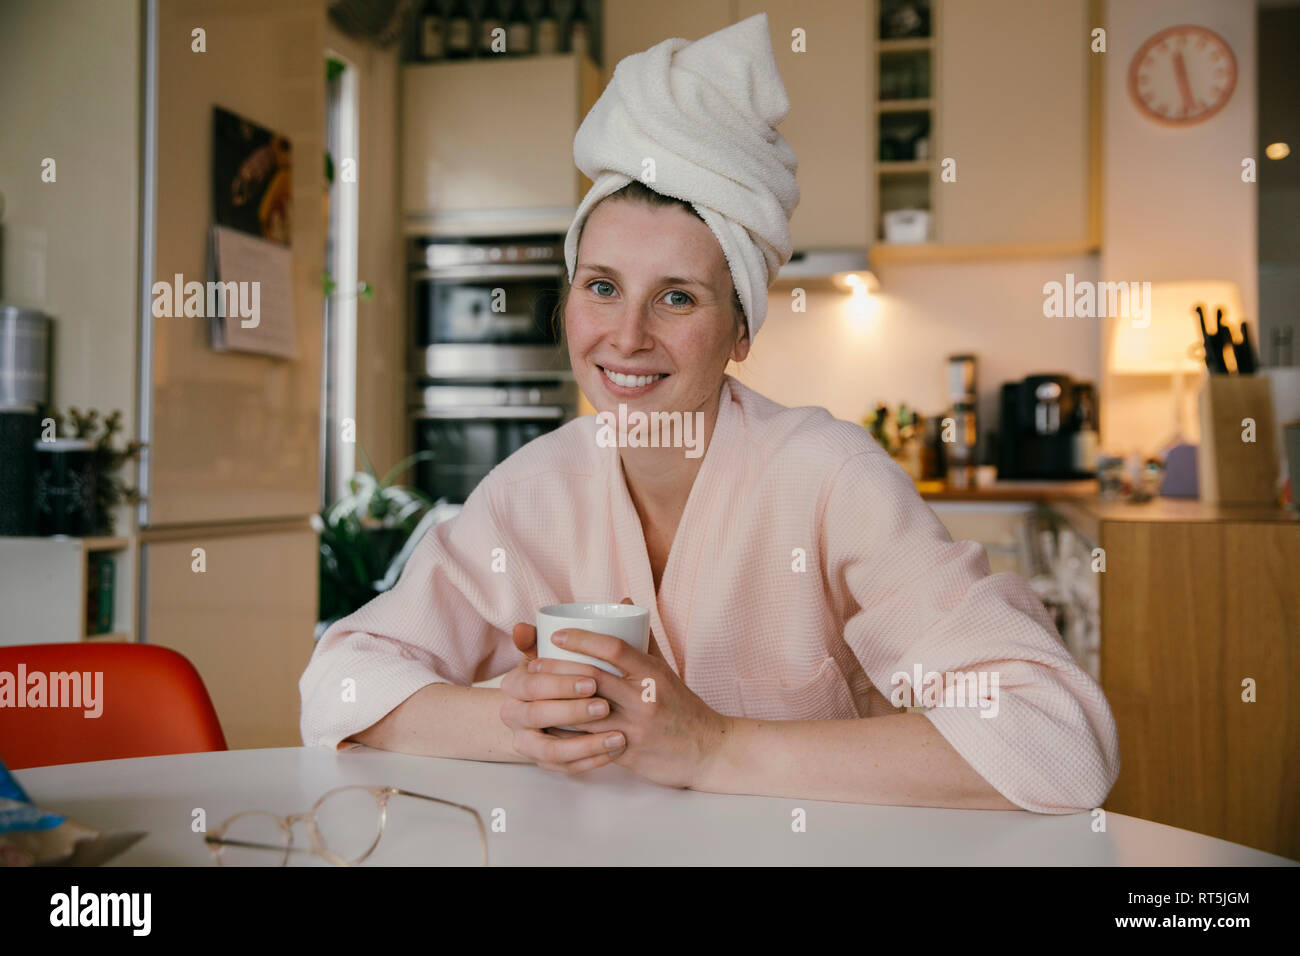 Portrait of smiling woman wearing a towel turban sitting with cup of coffee at table in the kitchen Stock Photo